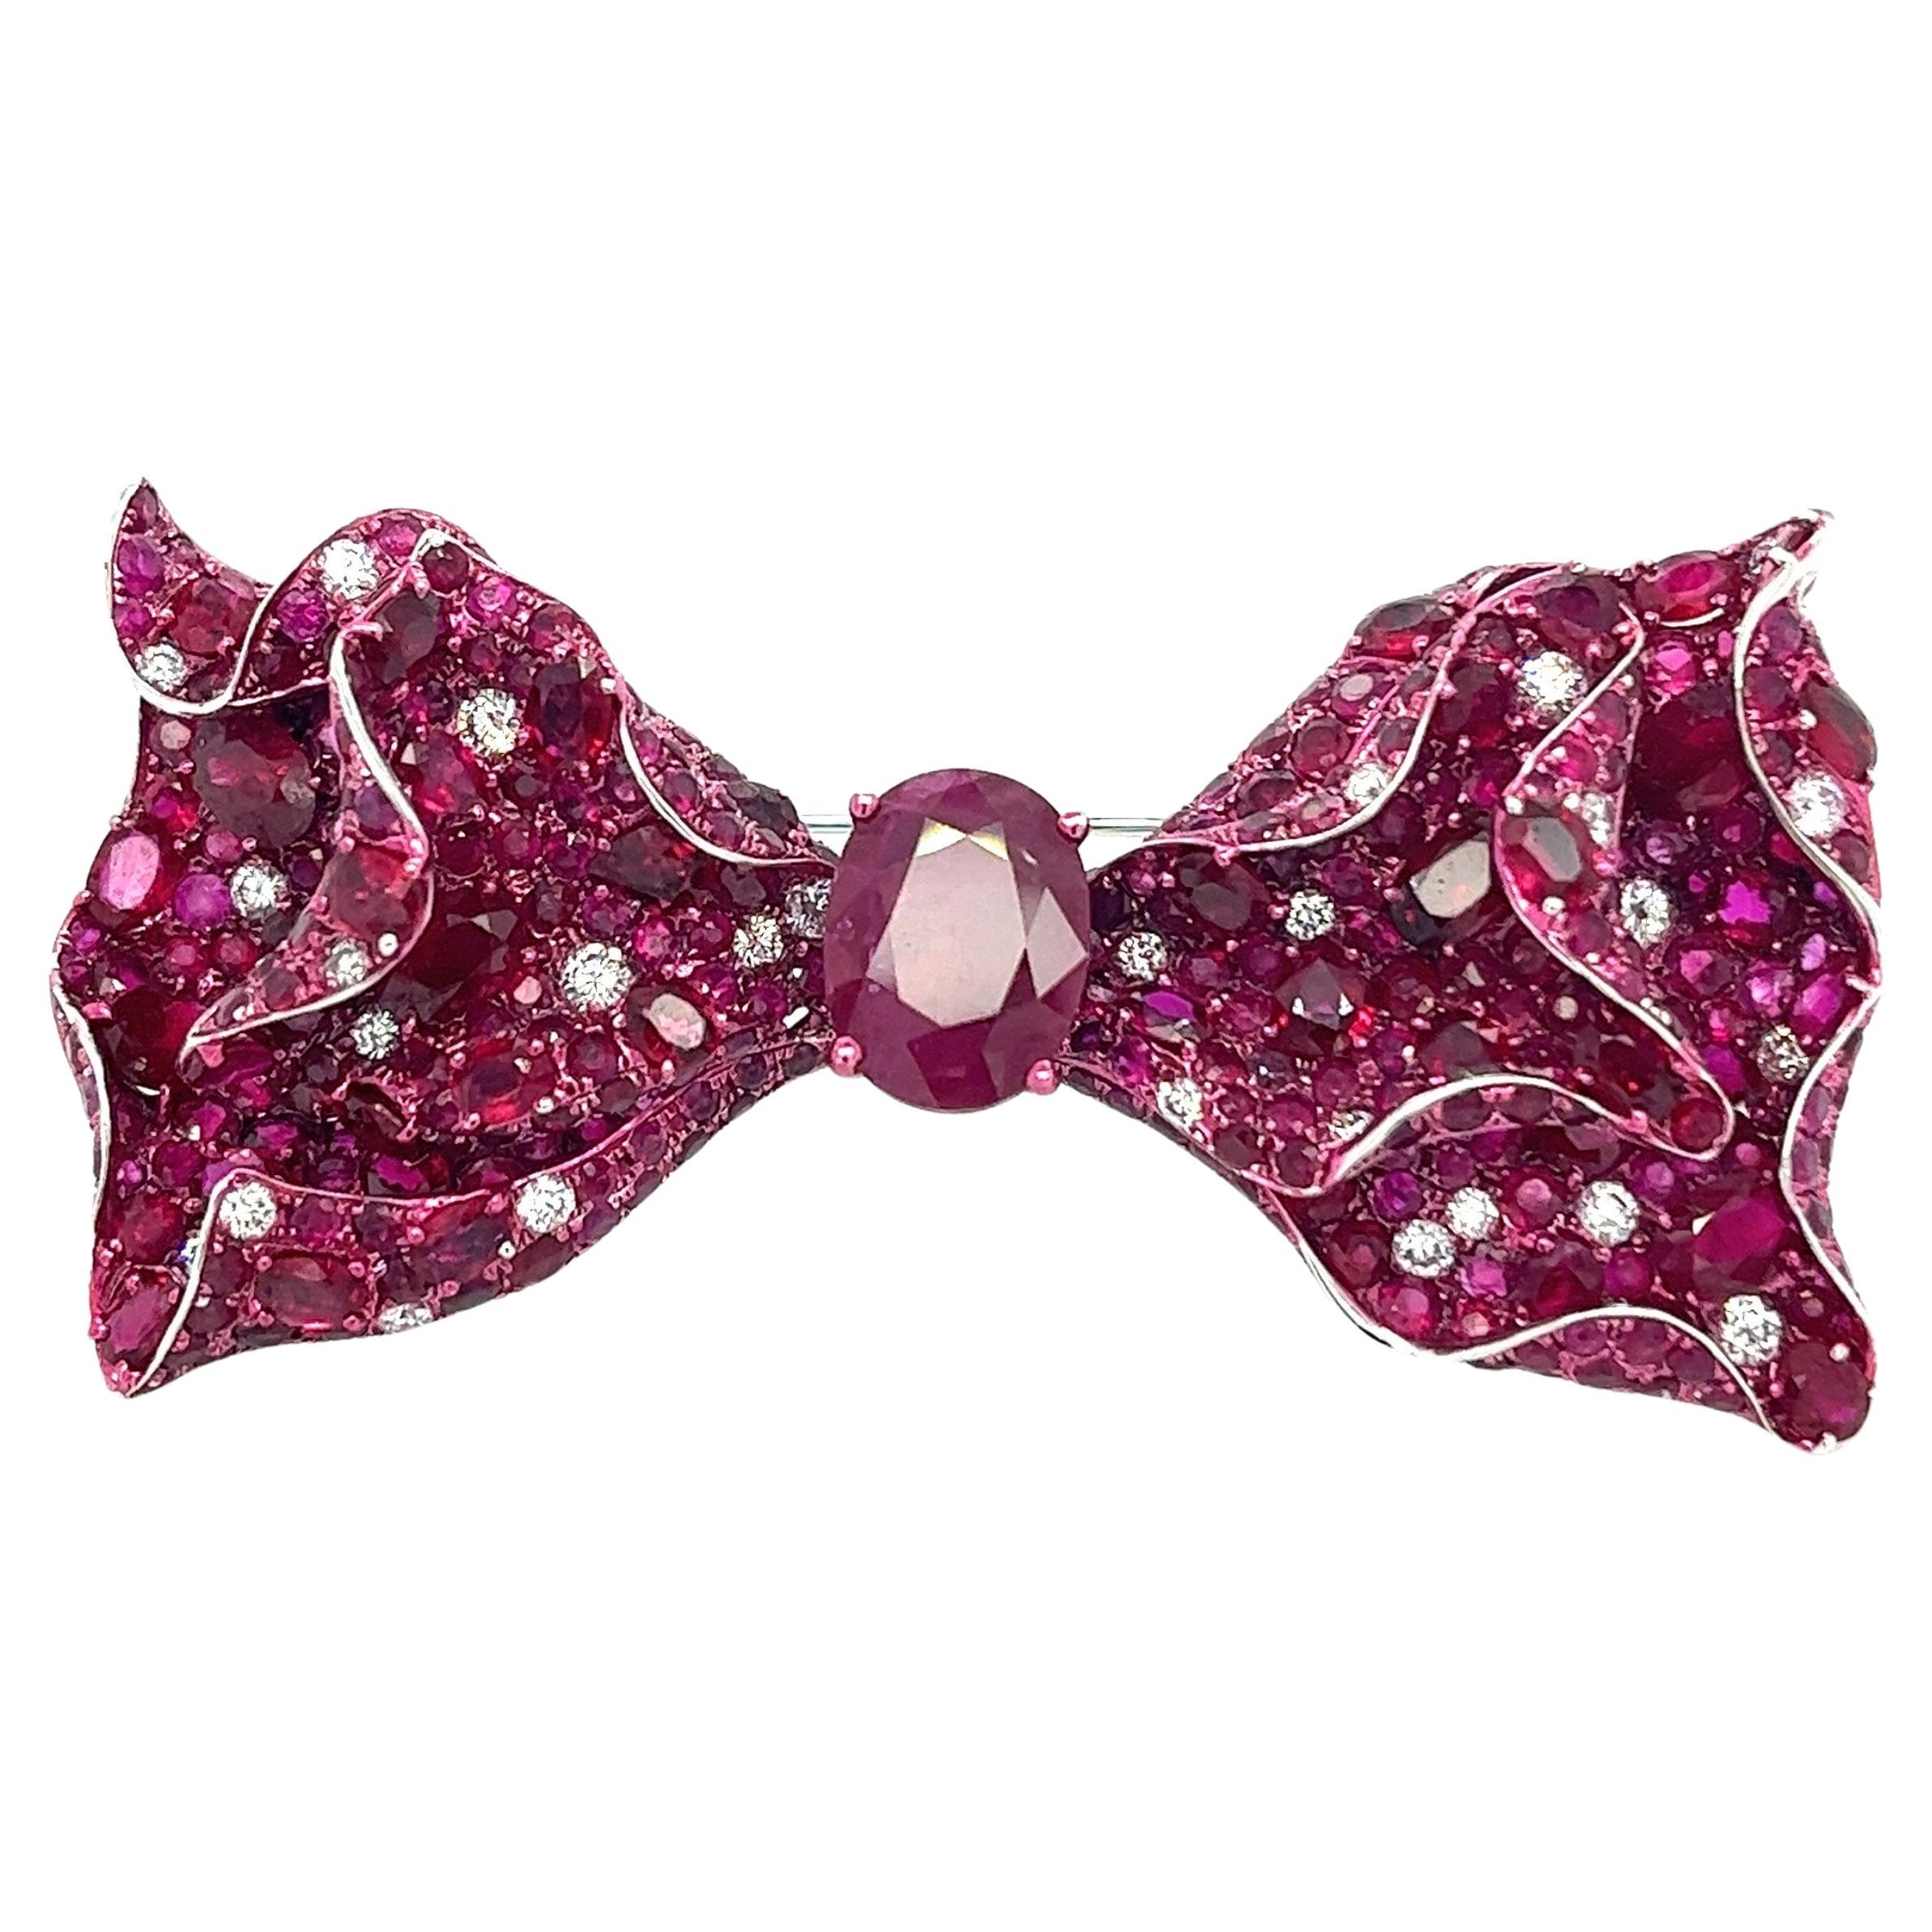 18K White Gold Ruby Bow Brooch with Diamonds